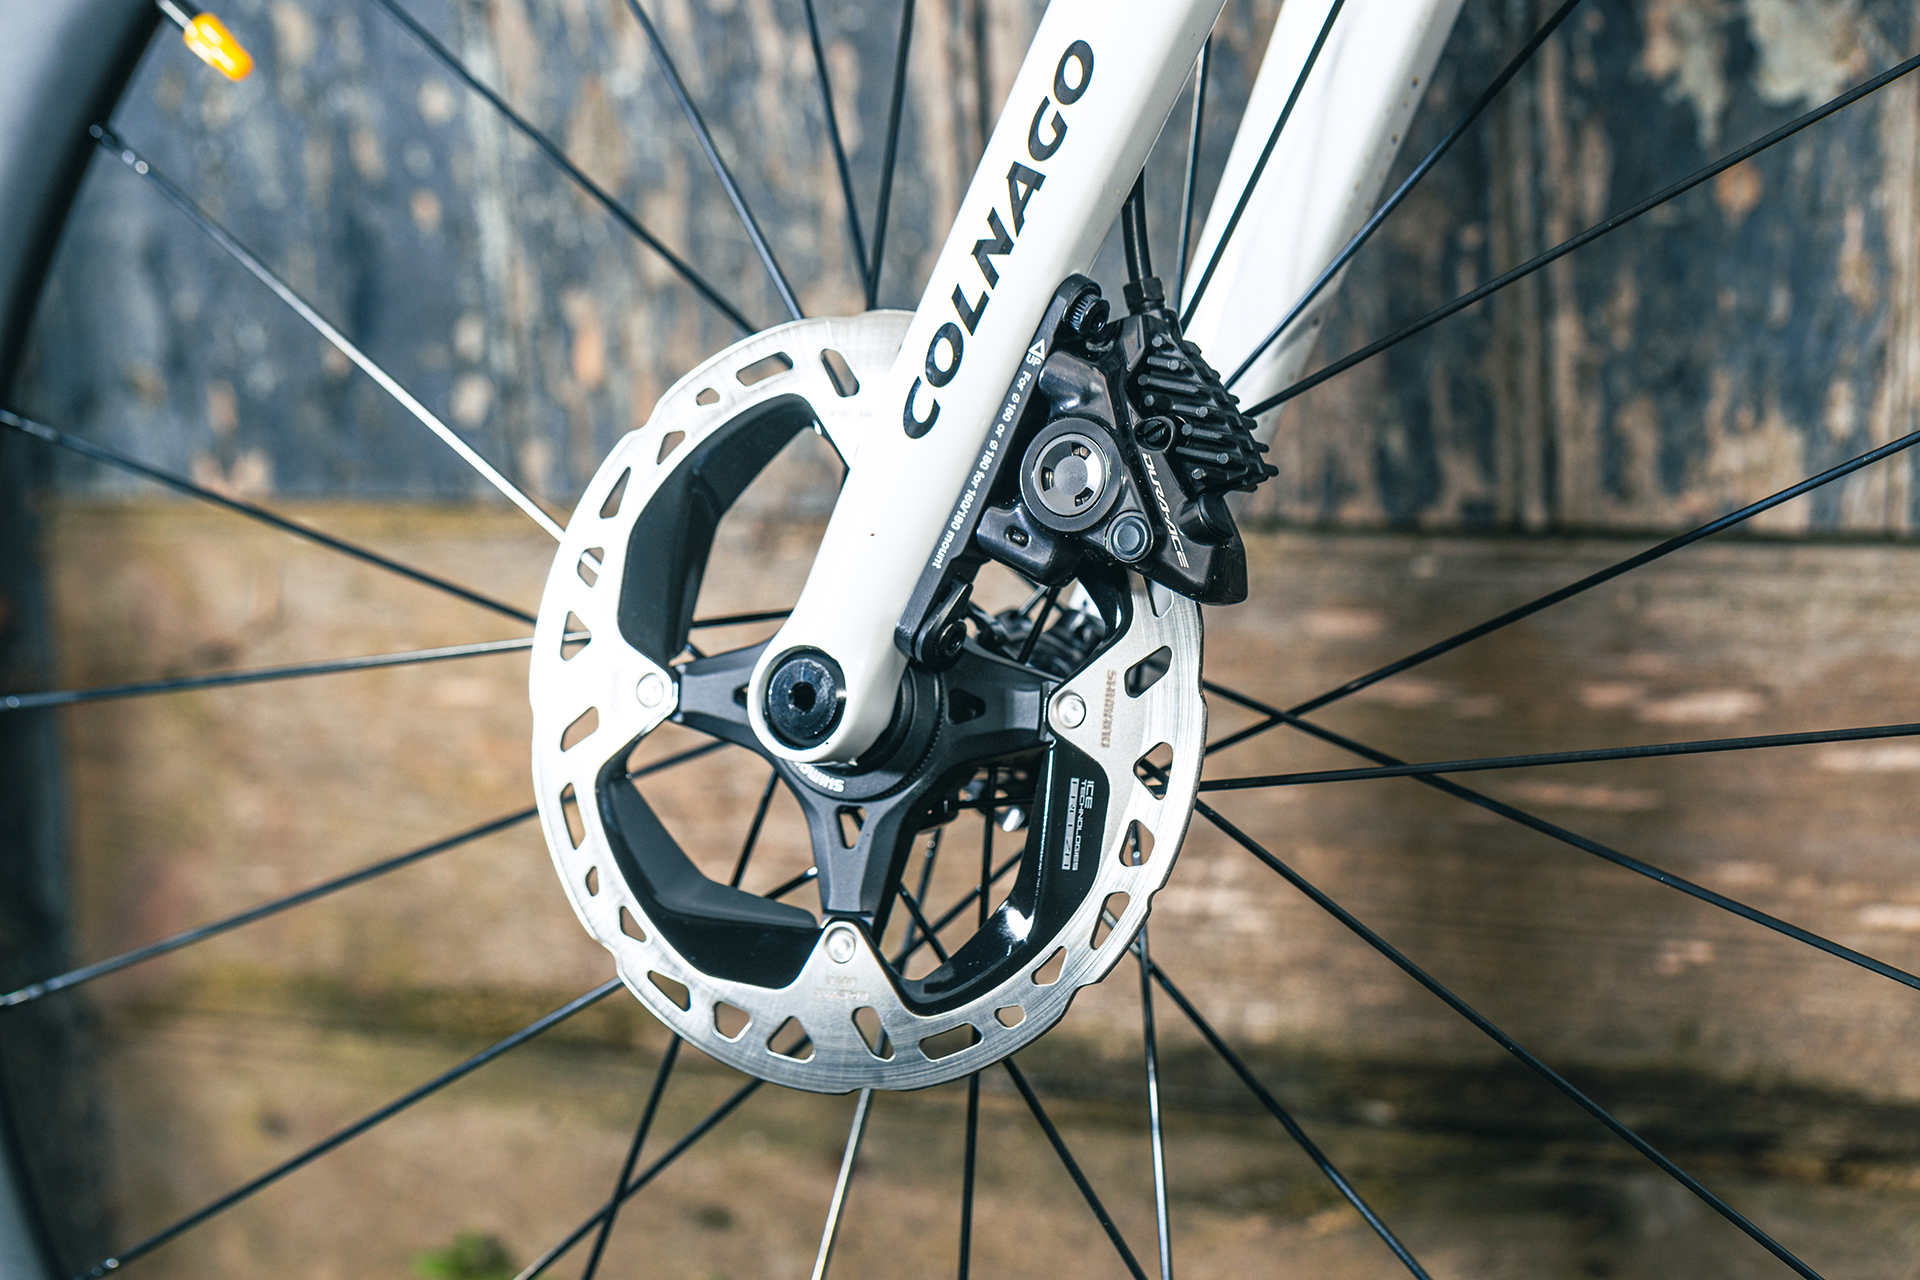 How to silence disc brakes: 9 ways to fix squealing disc brakes